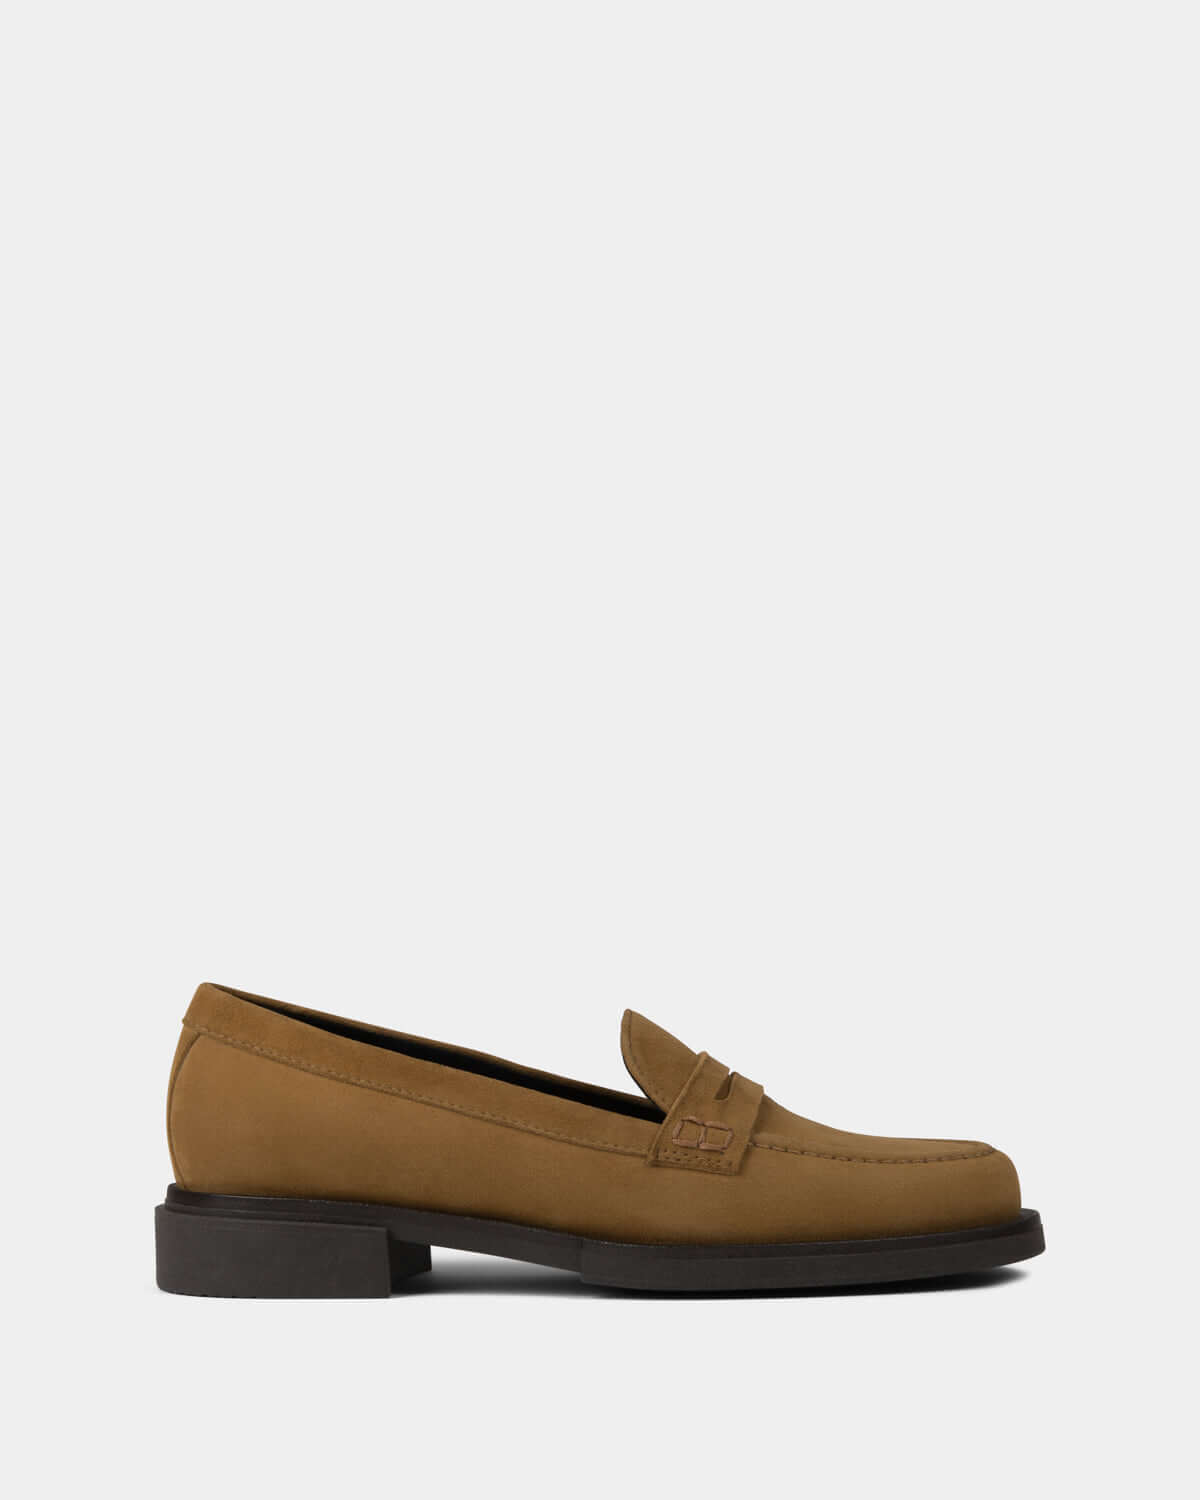 kallu-kallú-mustard-suede-patent-leather-loafers-for-women-made-in-spain-loafers-moccasins